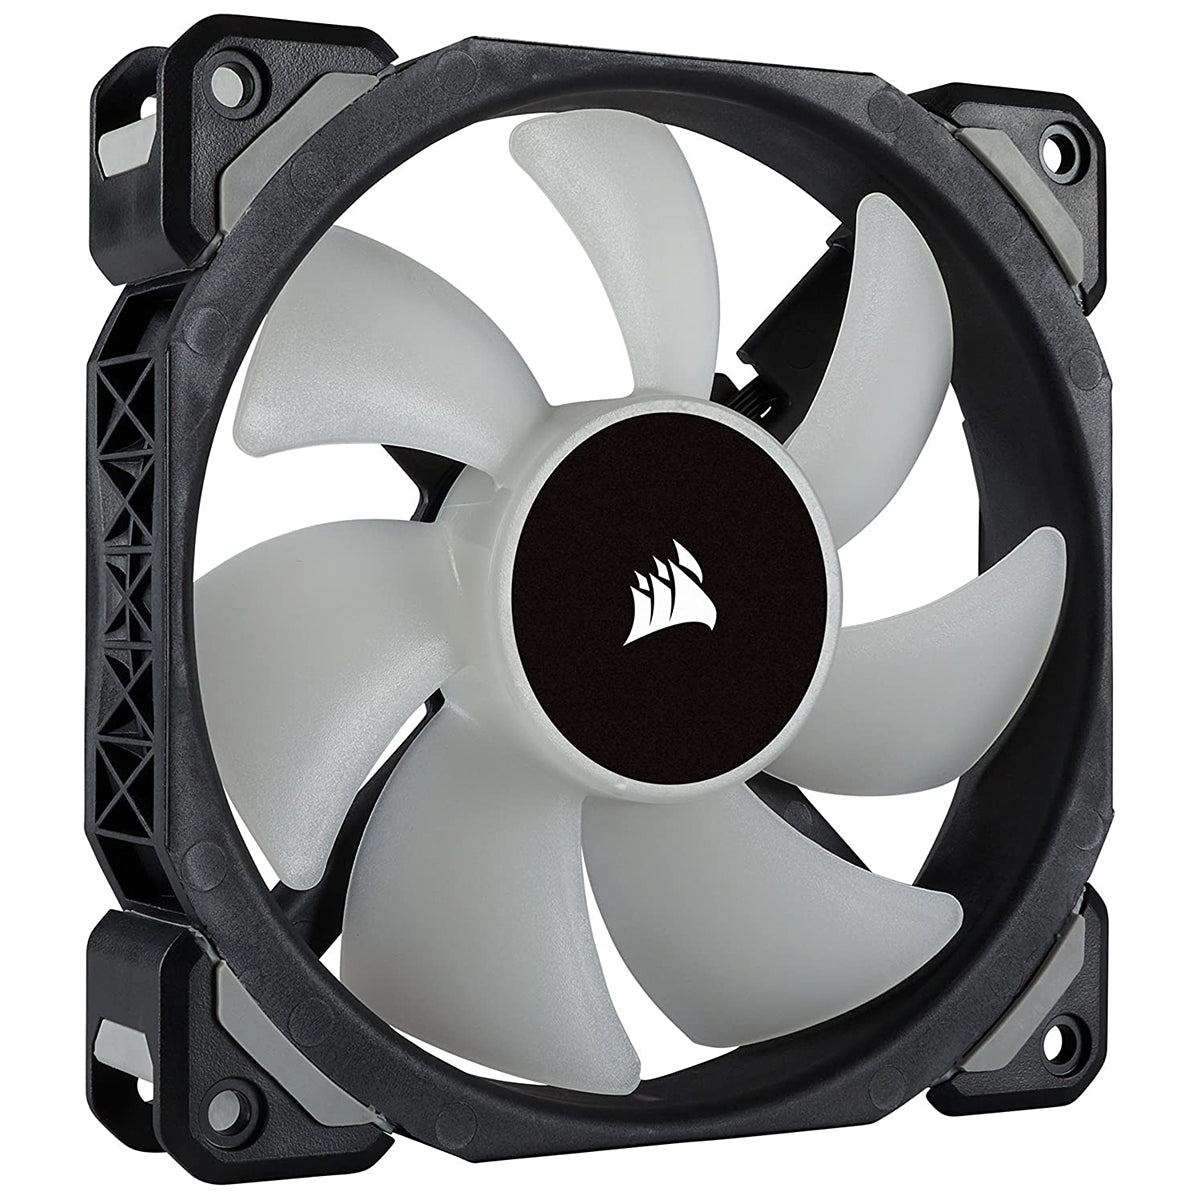 Corsair ML120 Case fan with Premium Magnetic Levitation 120mm RGB LED Fan From TPS Technologies